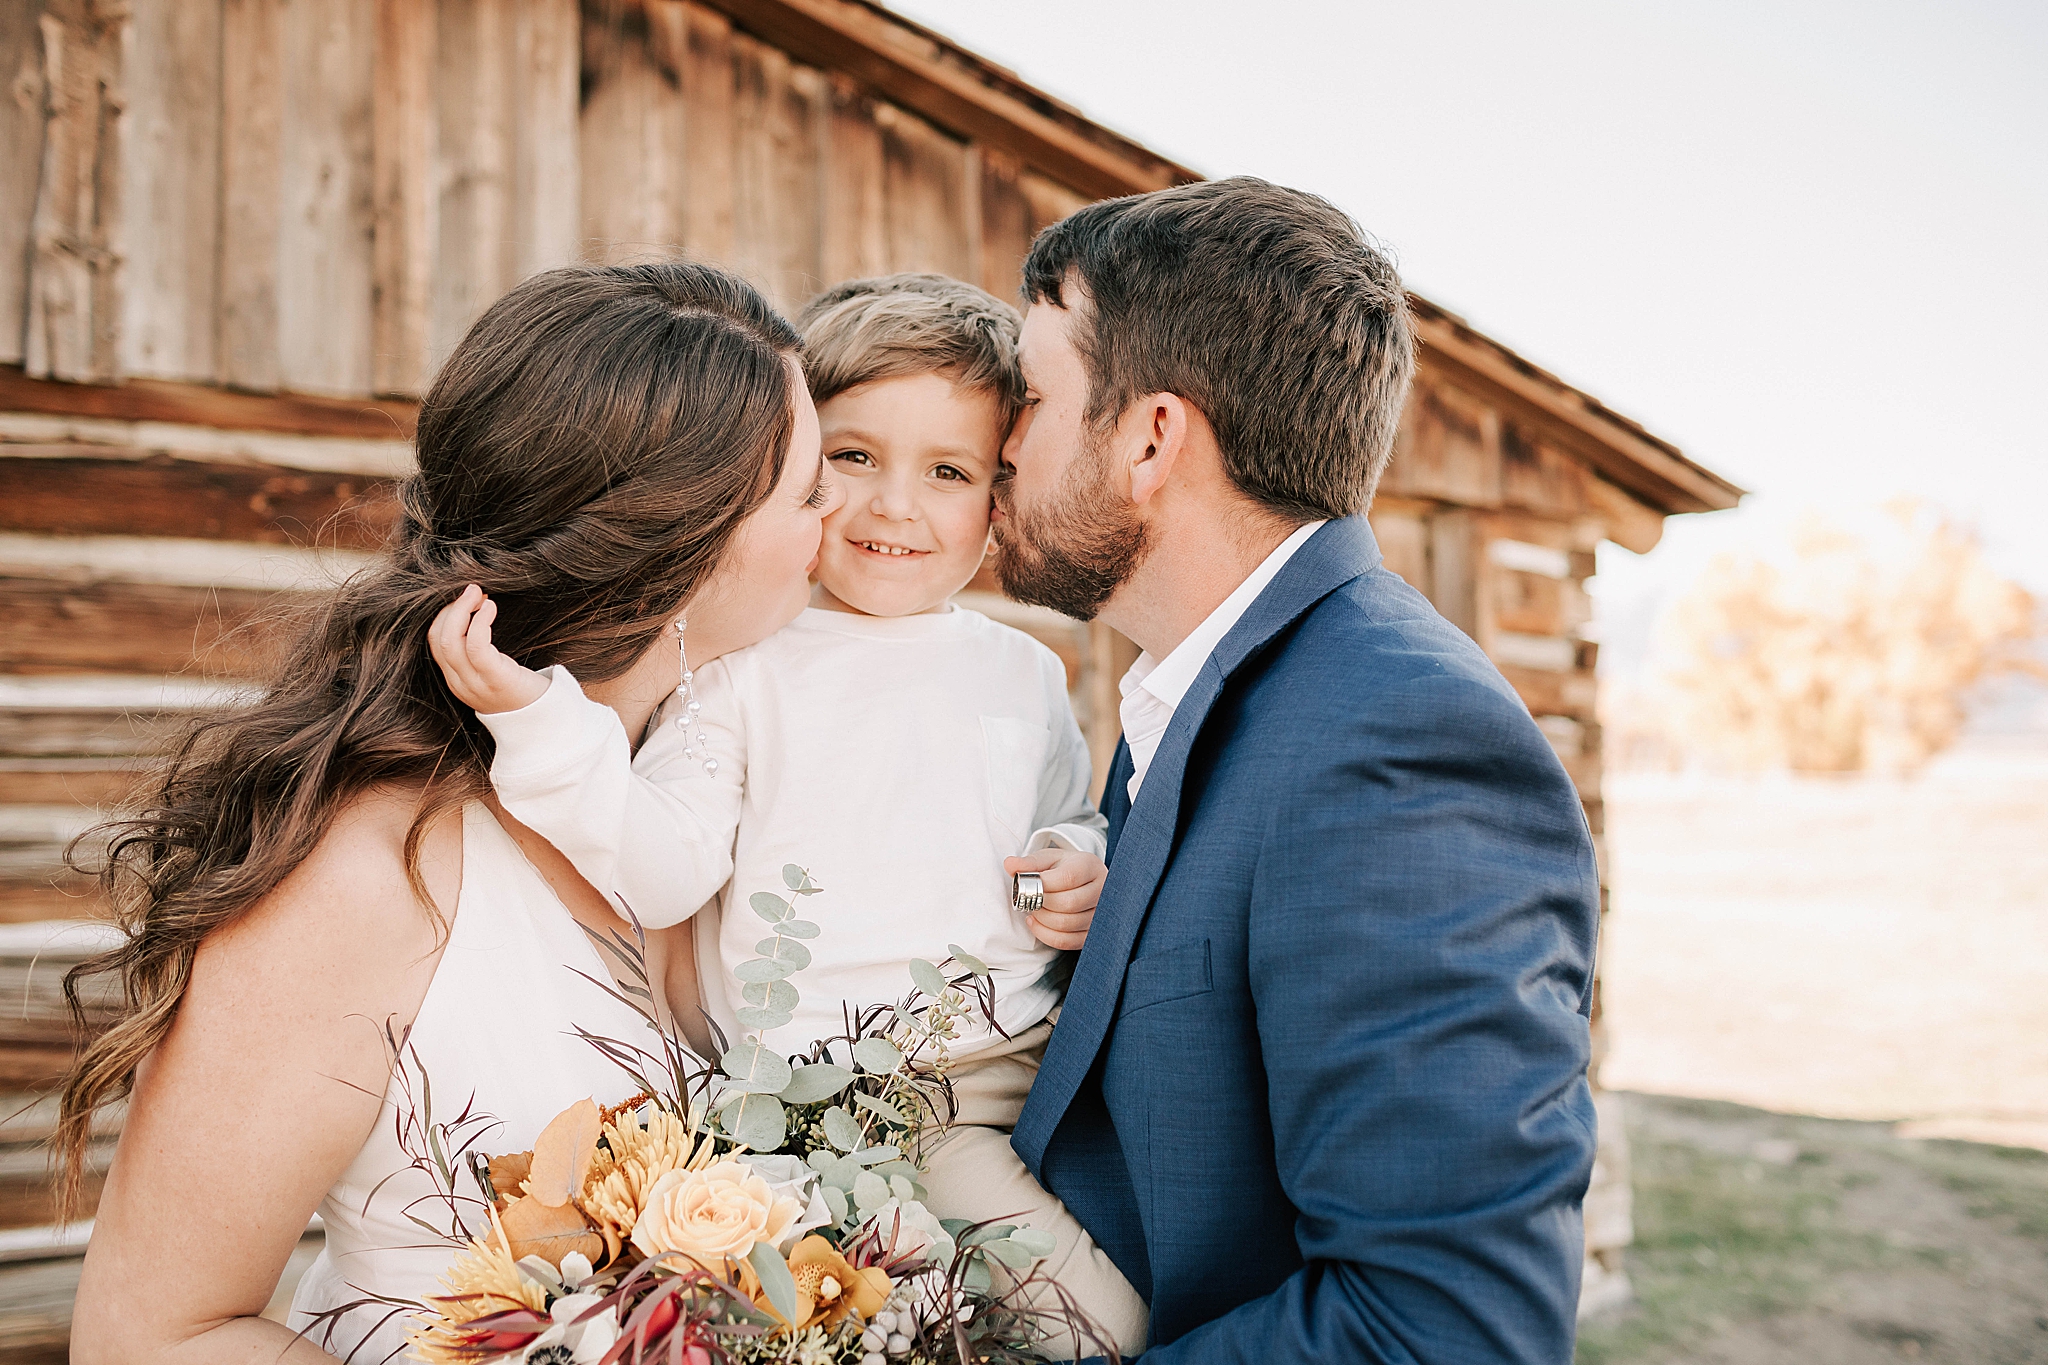 bride and groom kissing their 3 year old after their intimate ceremony. photo taken by adrian wayment photo.